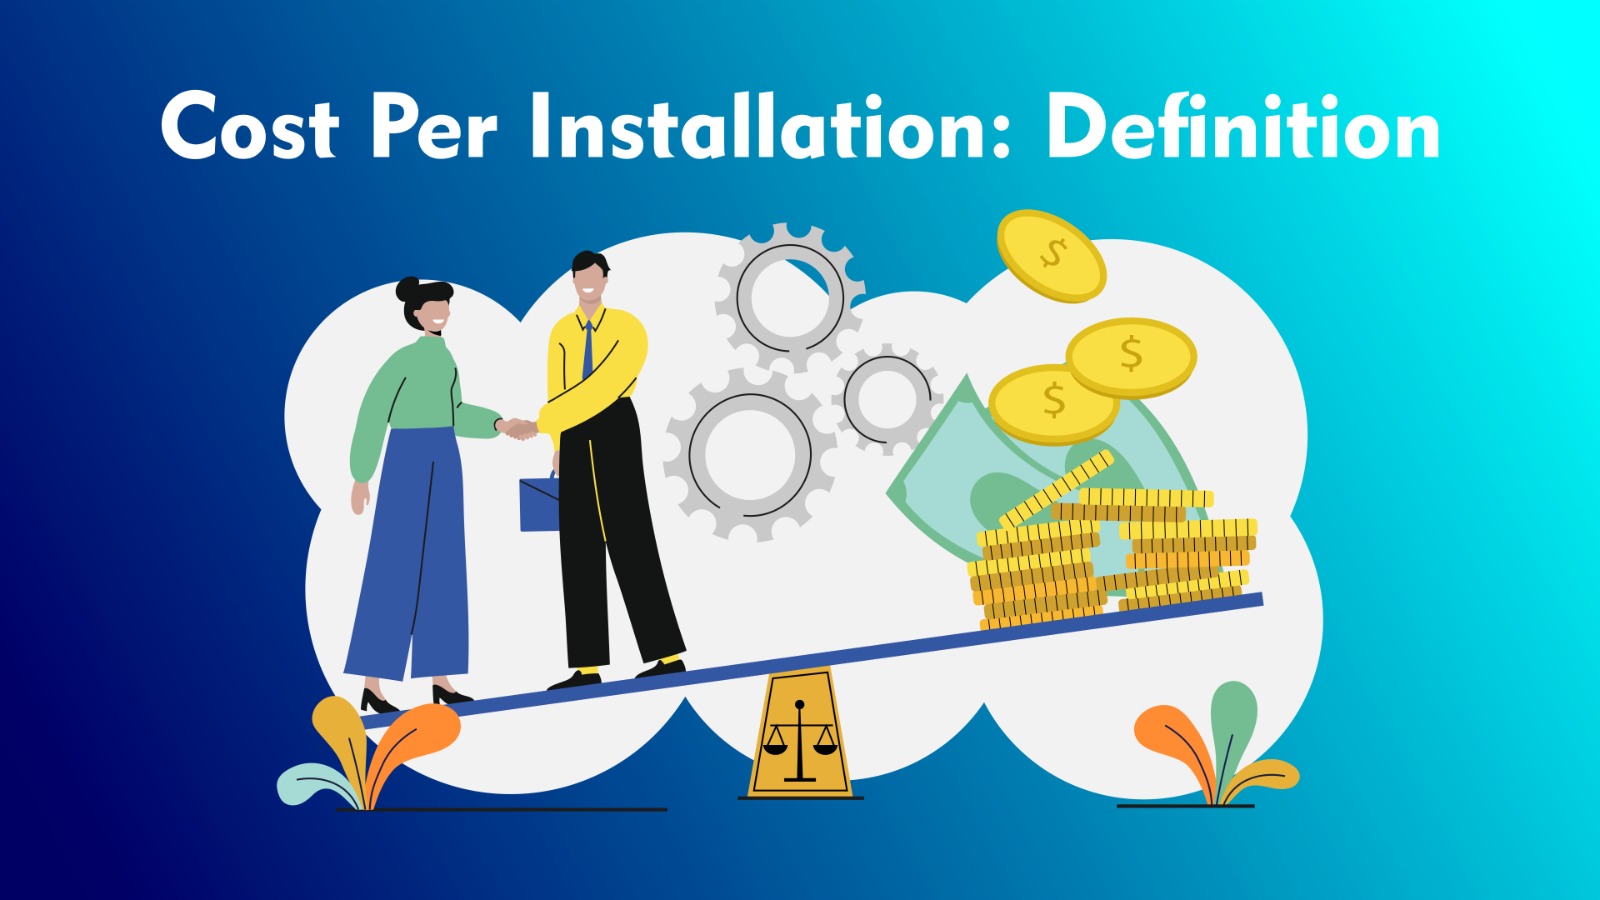 pay per install, mobile app cost per install, cost per app install india, android app promotion pay per install, pay per install android, pay per install advertising, pay per install app advertising